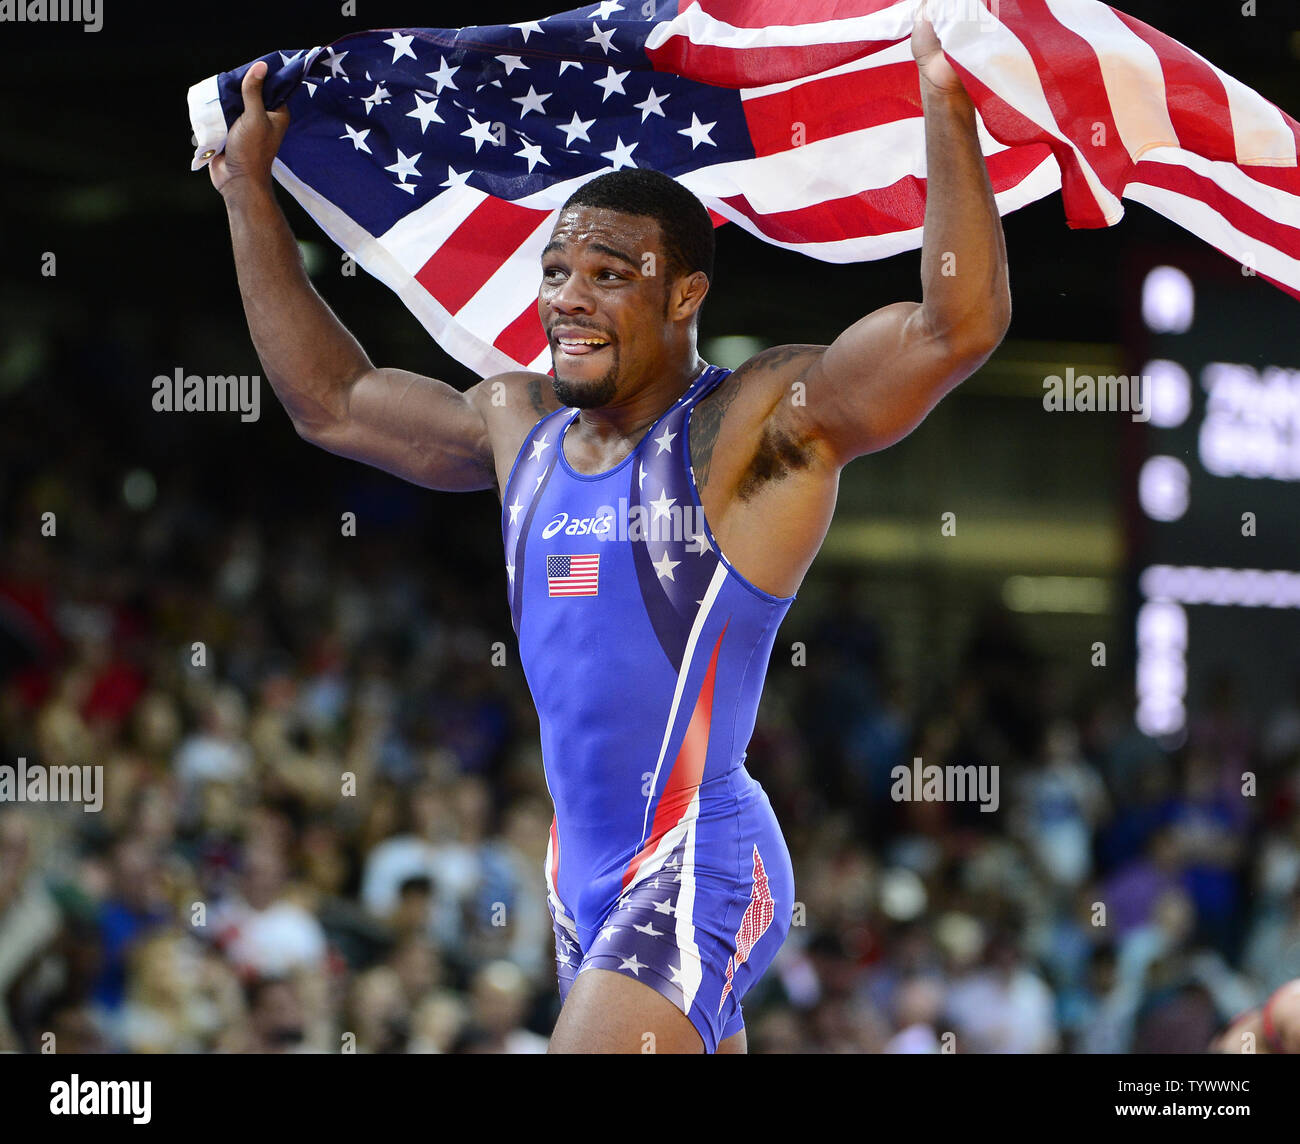 Jordan Ernest Burroughs of the United States of America celebrates after winning the Gold Medal in the Men's 74kg Freestyle Wrestling against Sadegh Saeed Goudarzi of Iran at the London 2012 Summer Olympics on August 10, 2012 in London. UPI/Ron Sachs Stock Photo